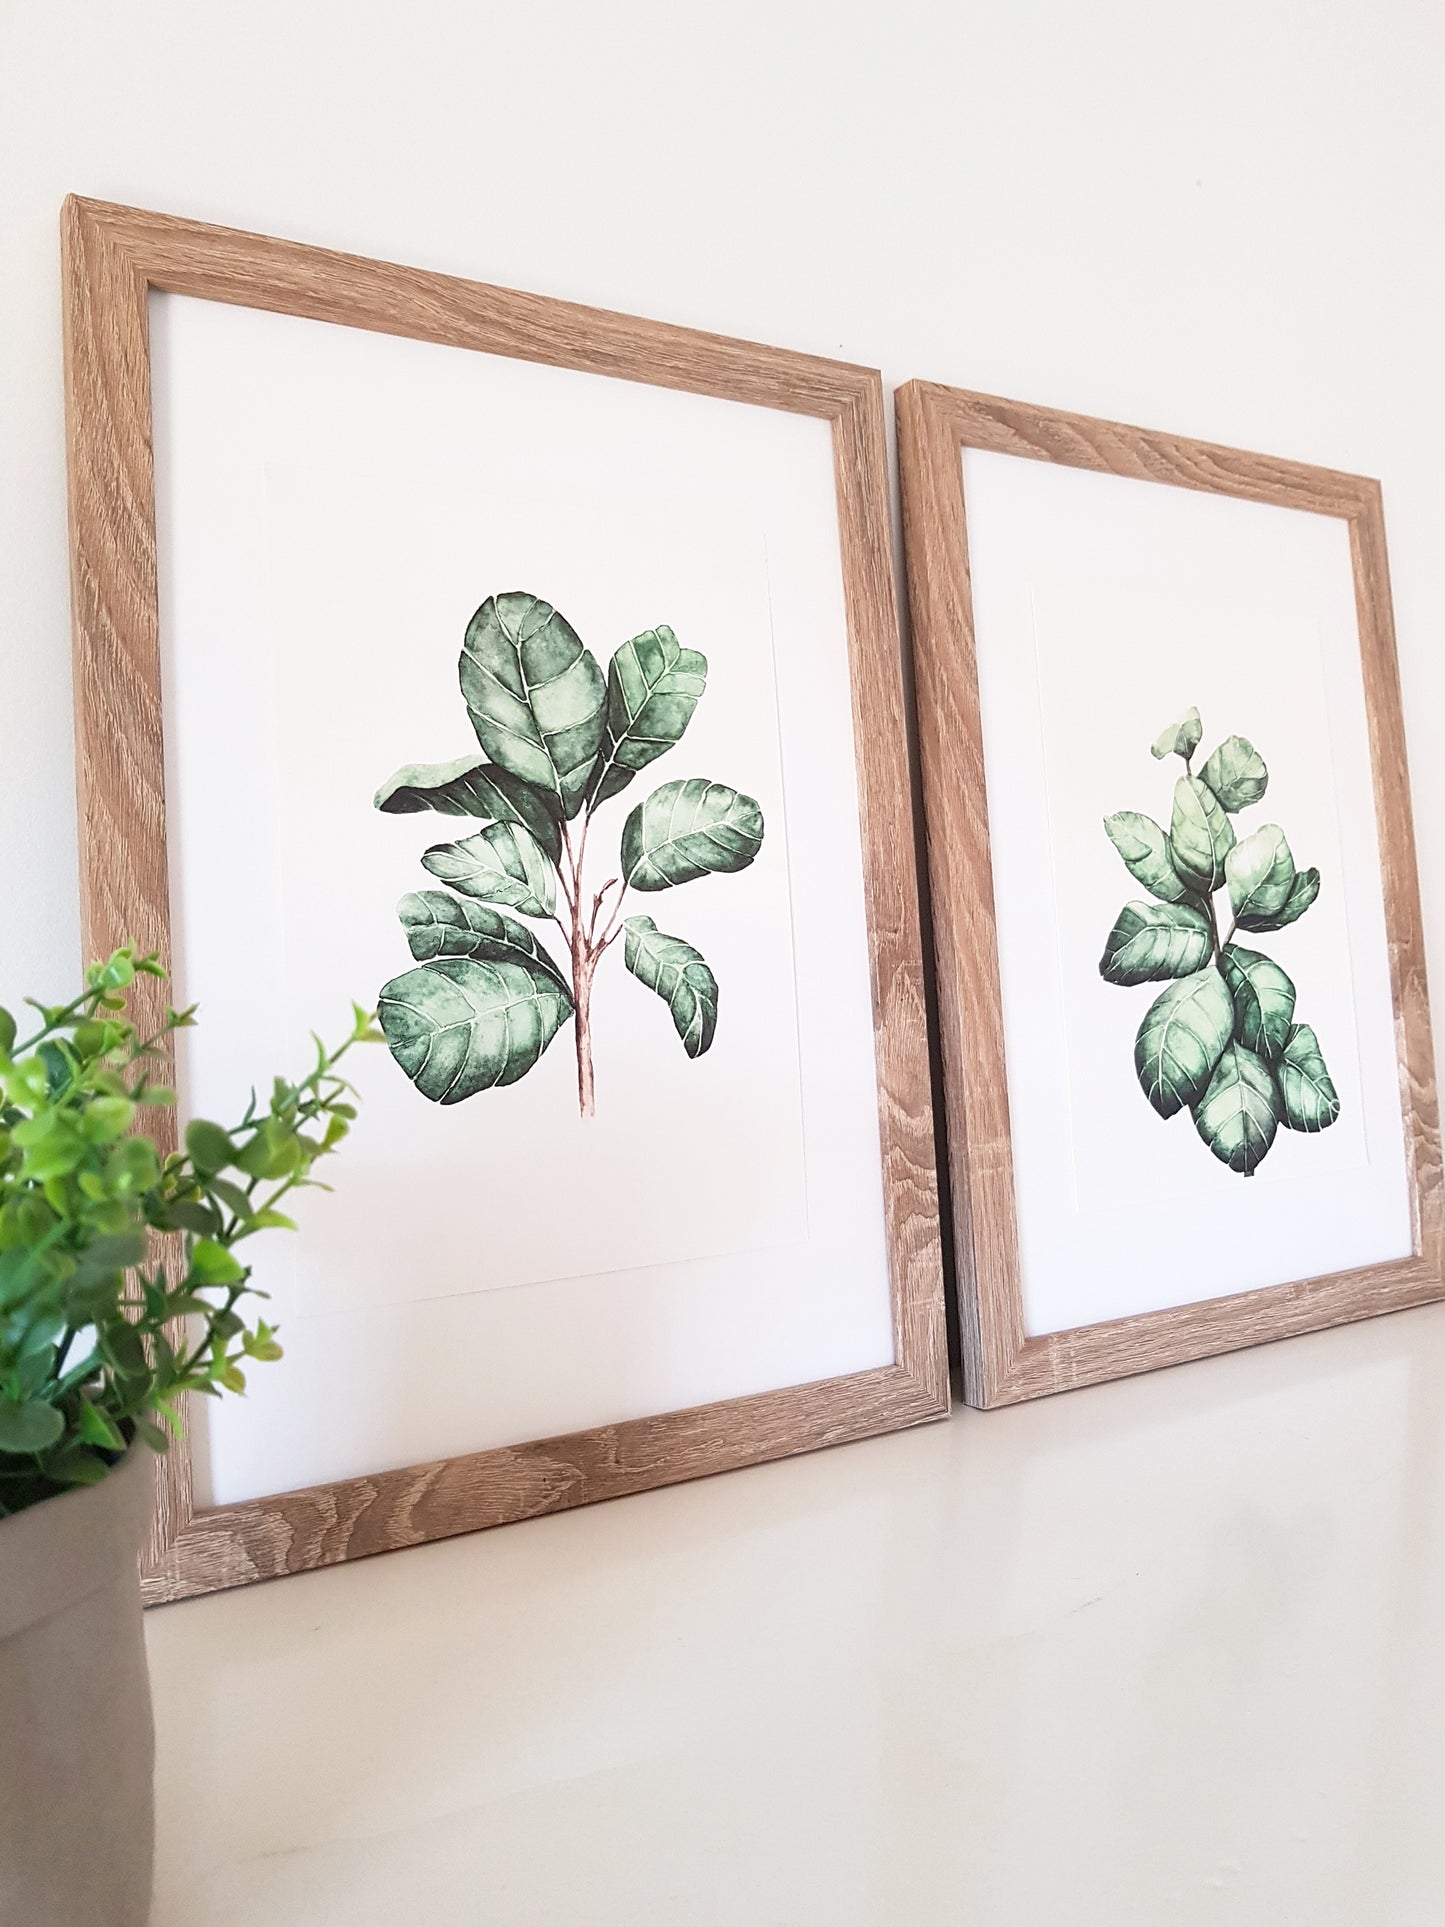 2 Alternative styles of a fiddlie leaf fig tree branch and leaves, painted in green using watercolour